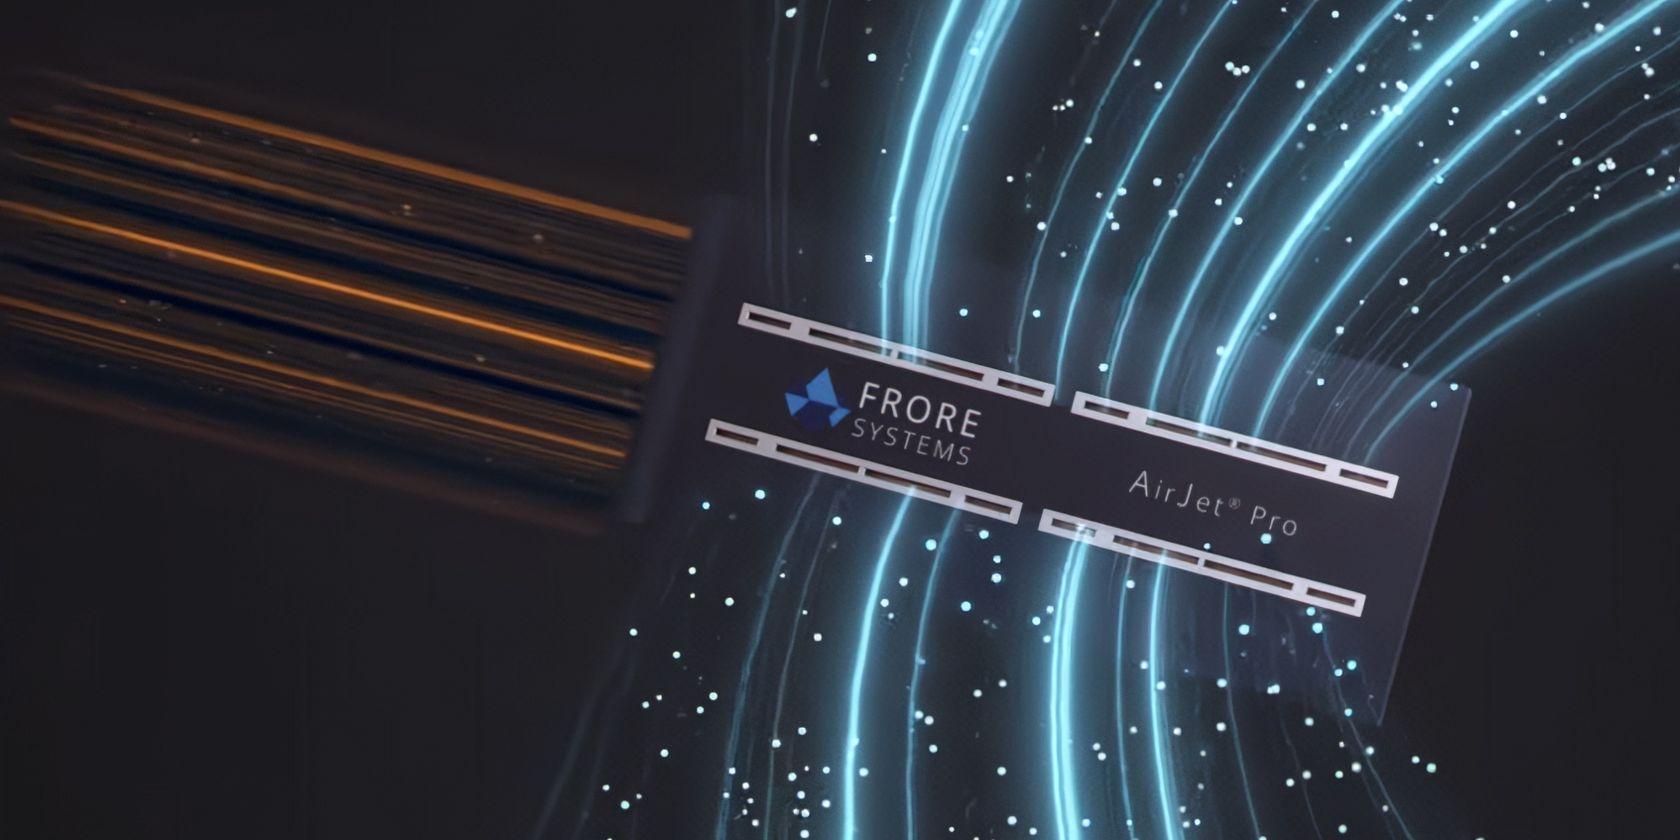 Frore Systems AirJet Pro screenshot